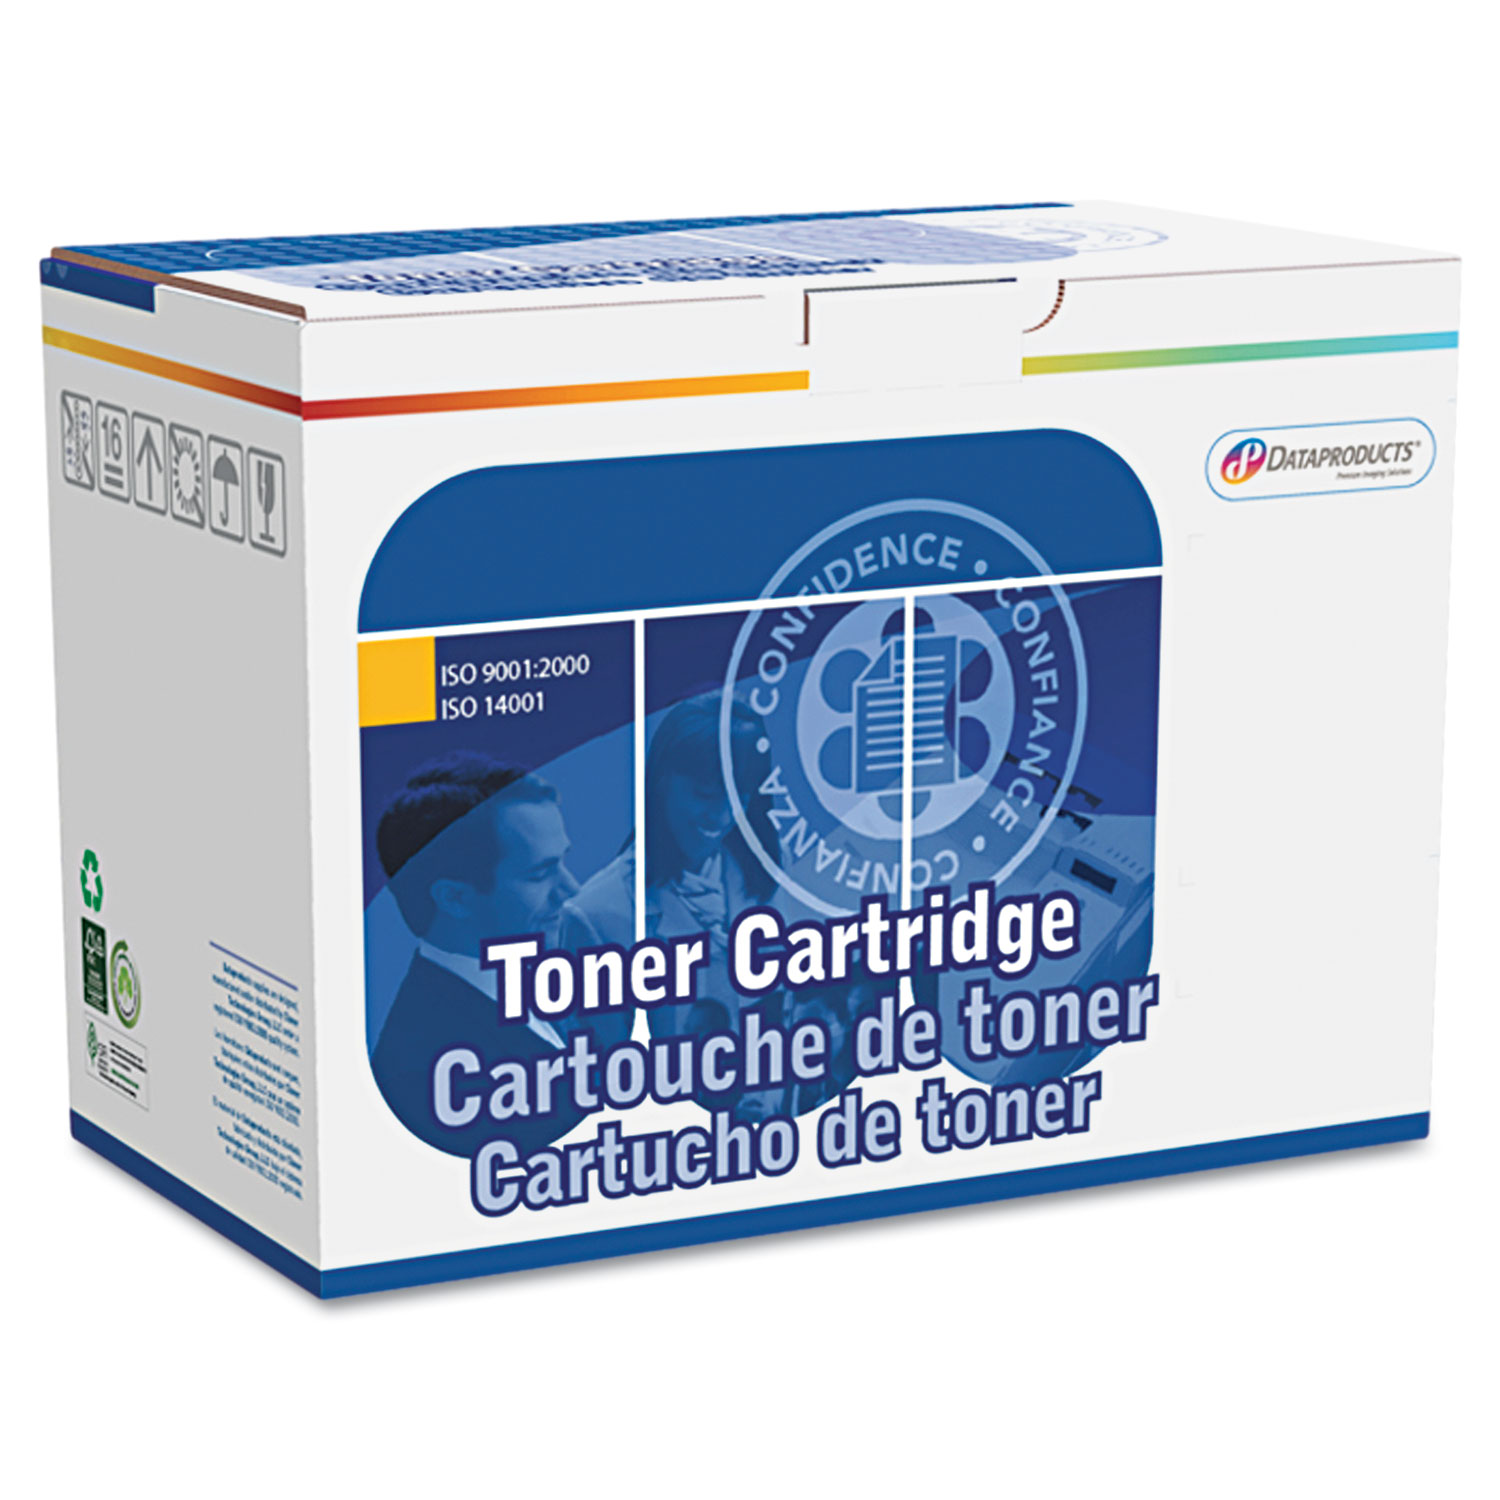 Remanufactured CC533A (304A) Toner, 2,800 Page-Yield, Magenta